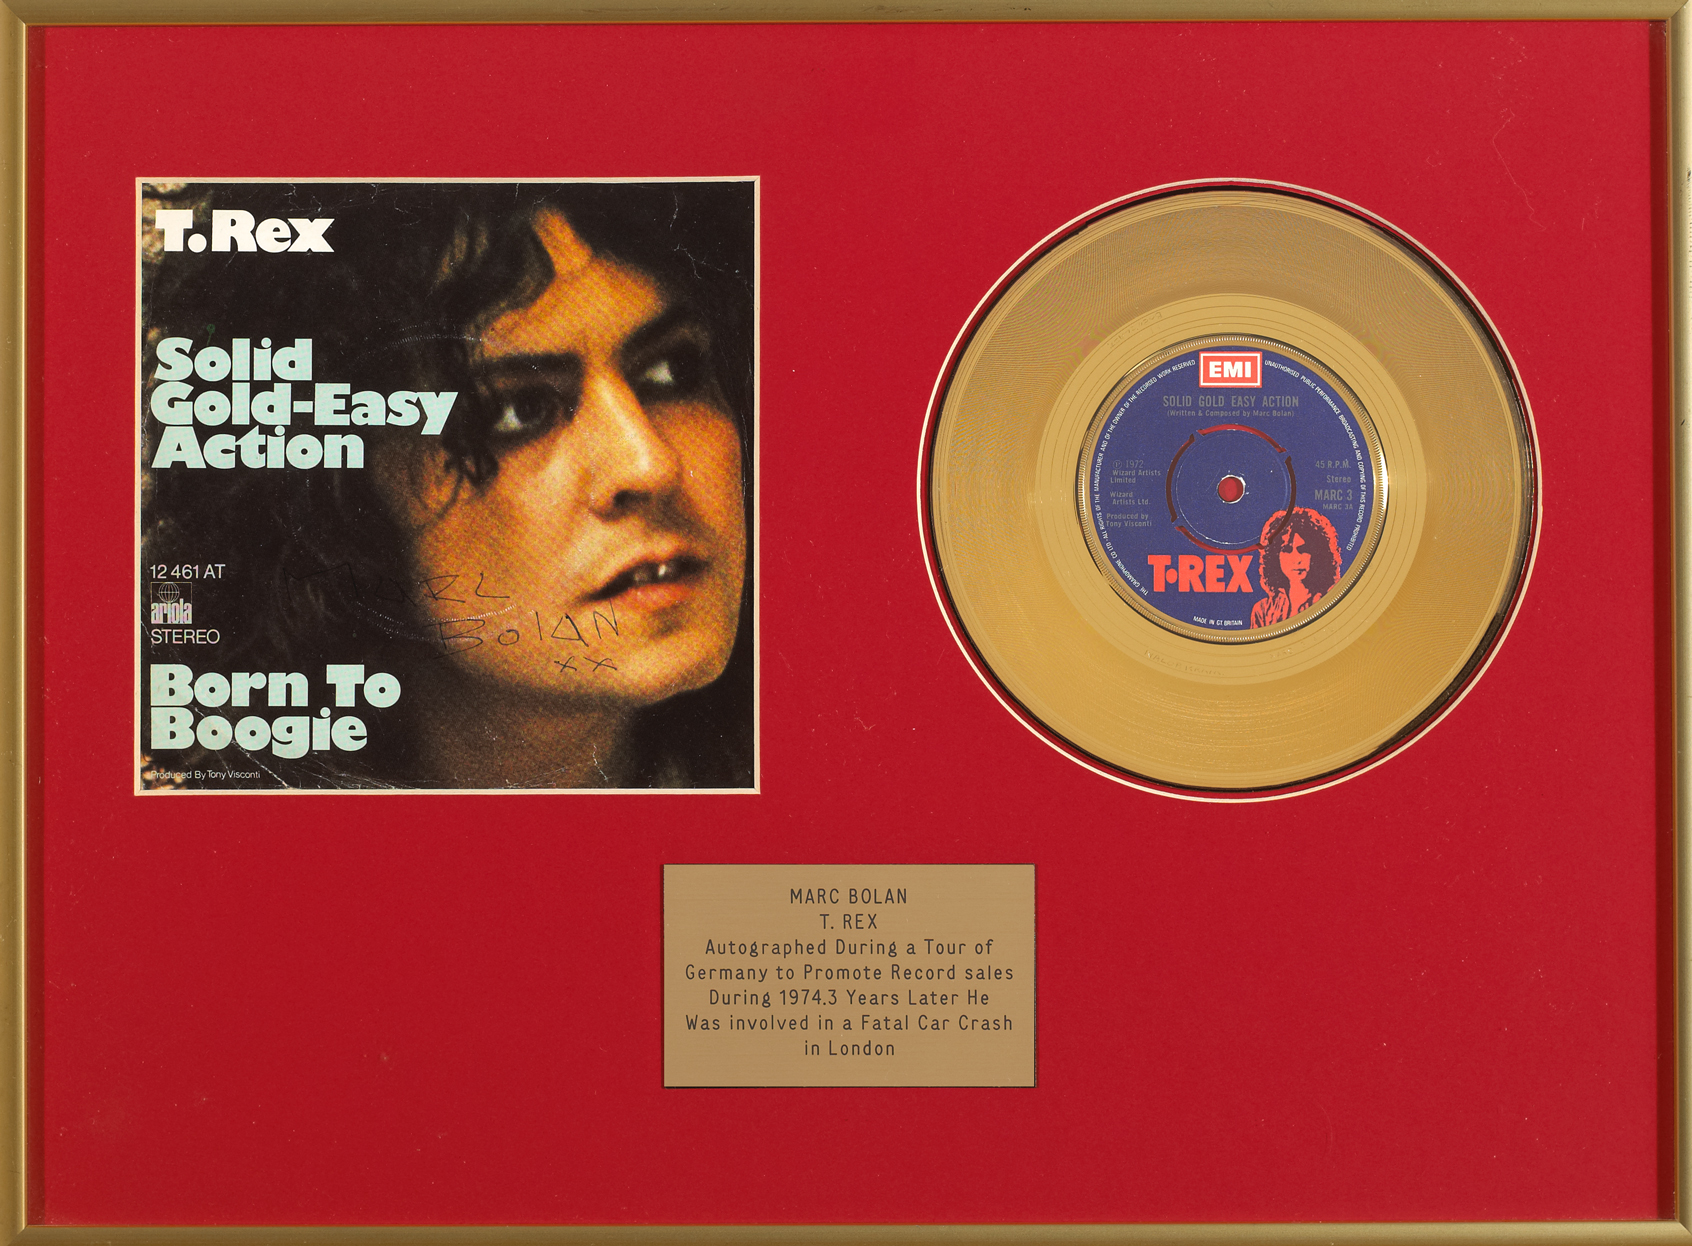 T. Rex: 'Sold Gold-Easy Action' '45 autographed by Marc Bolan 1974 at Whyte's Auctions